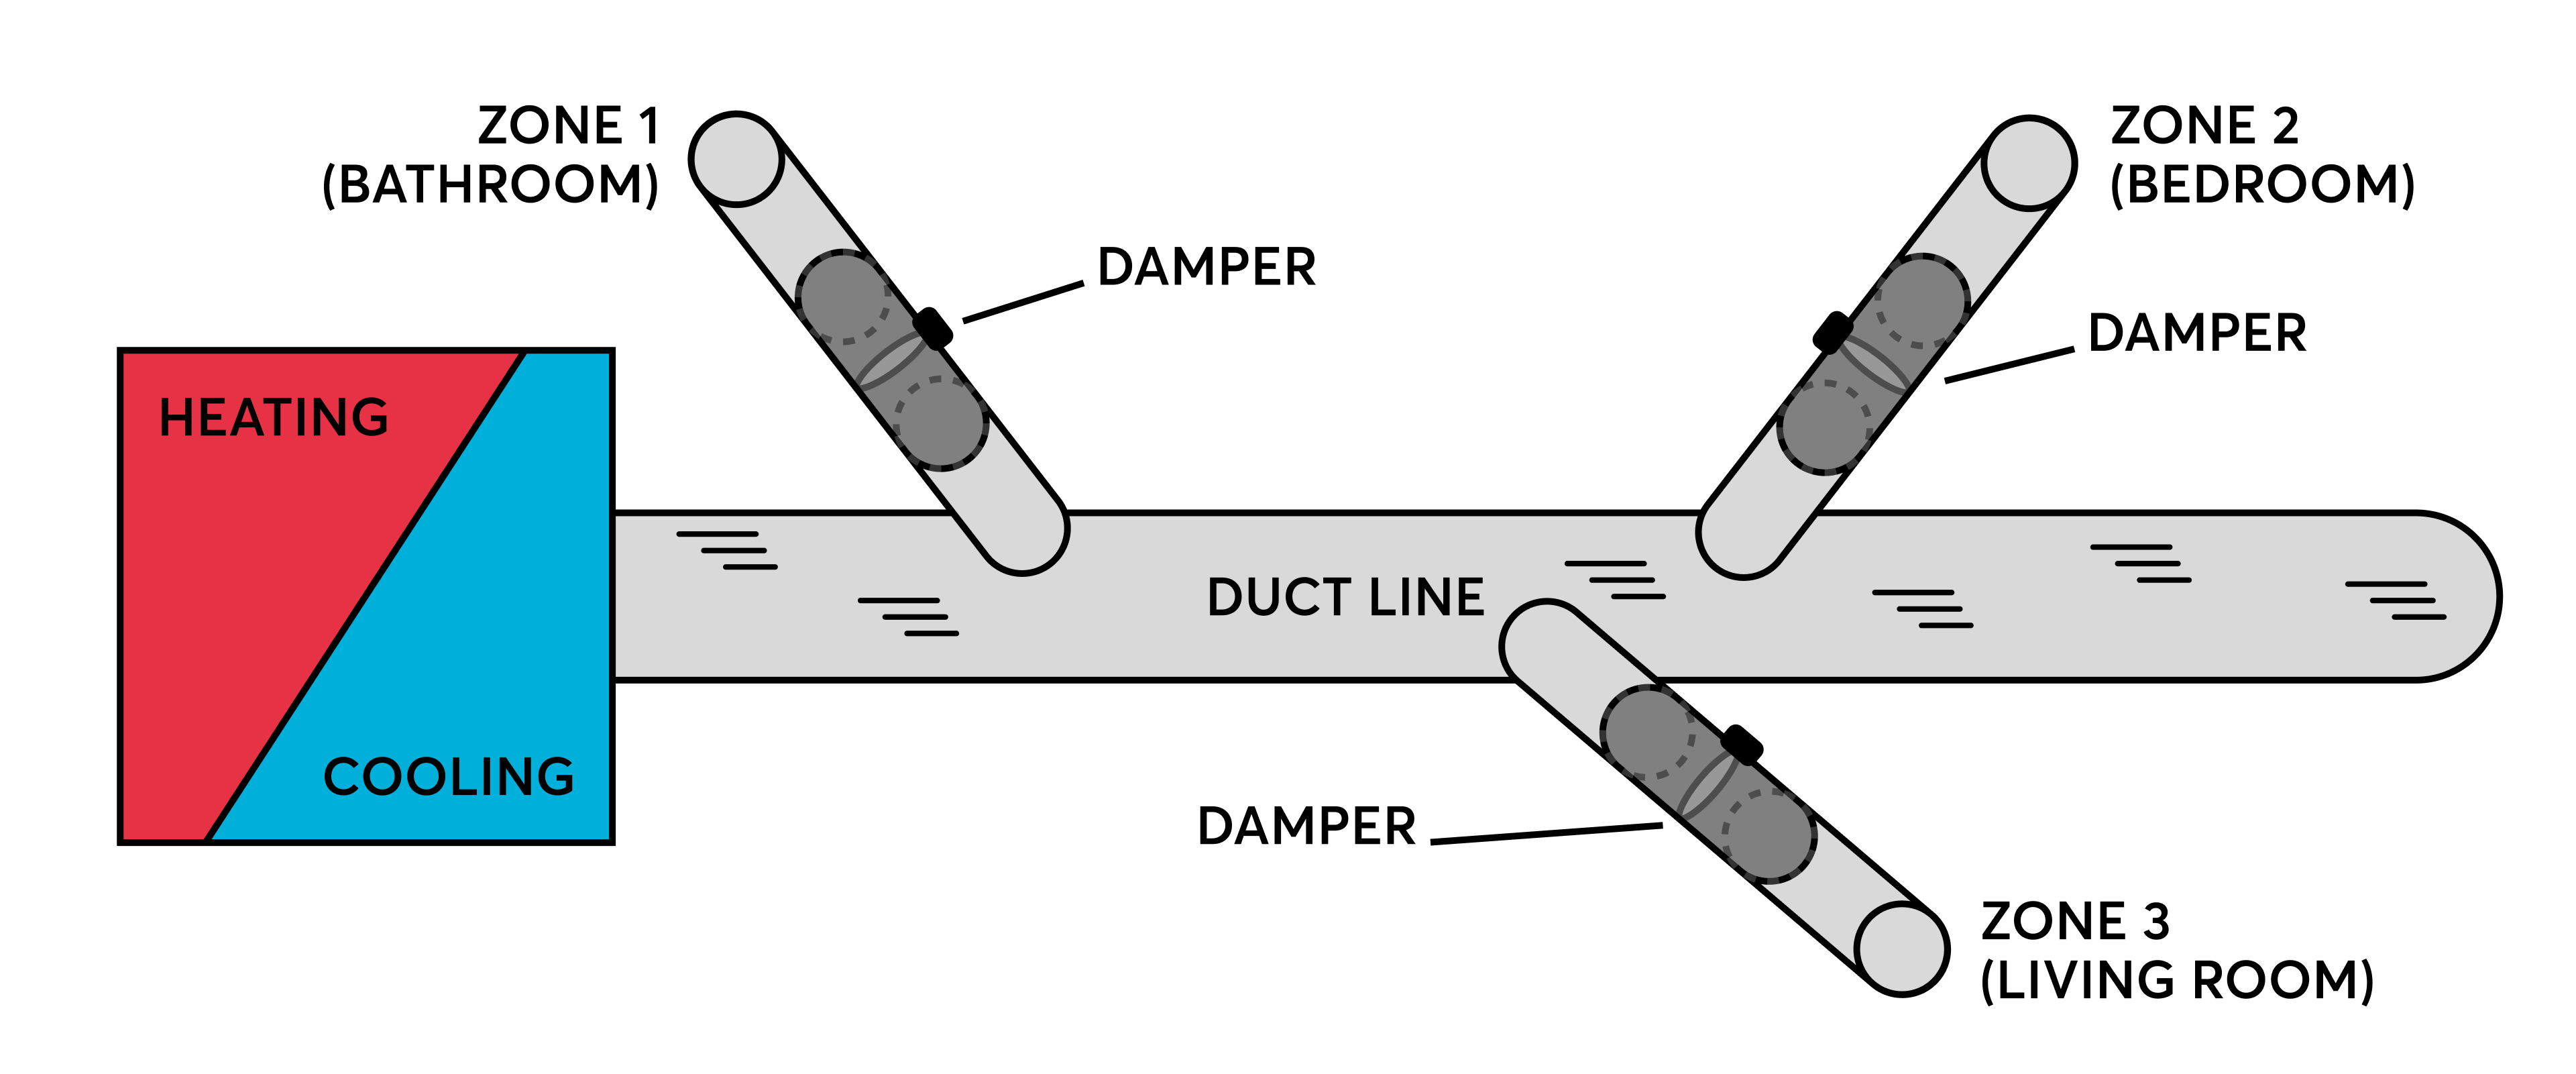 How dampers work to facilitate zoned HVAC control.